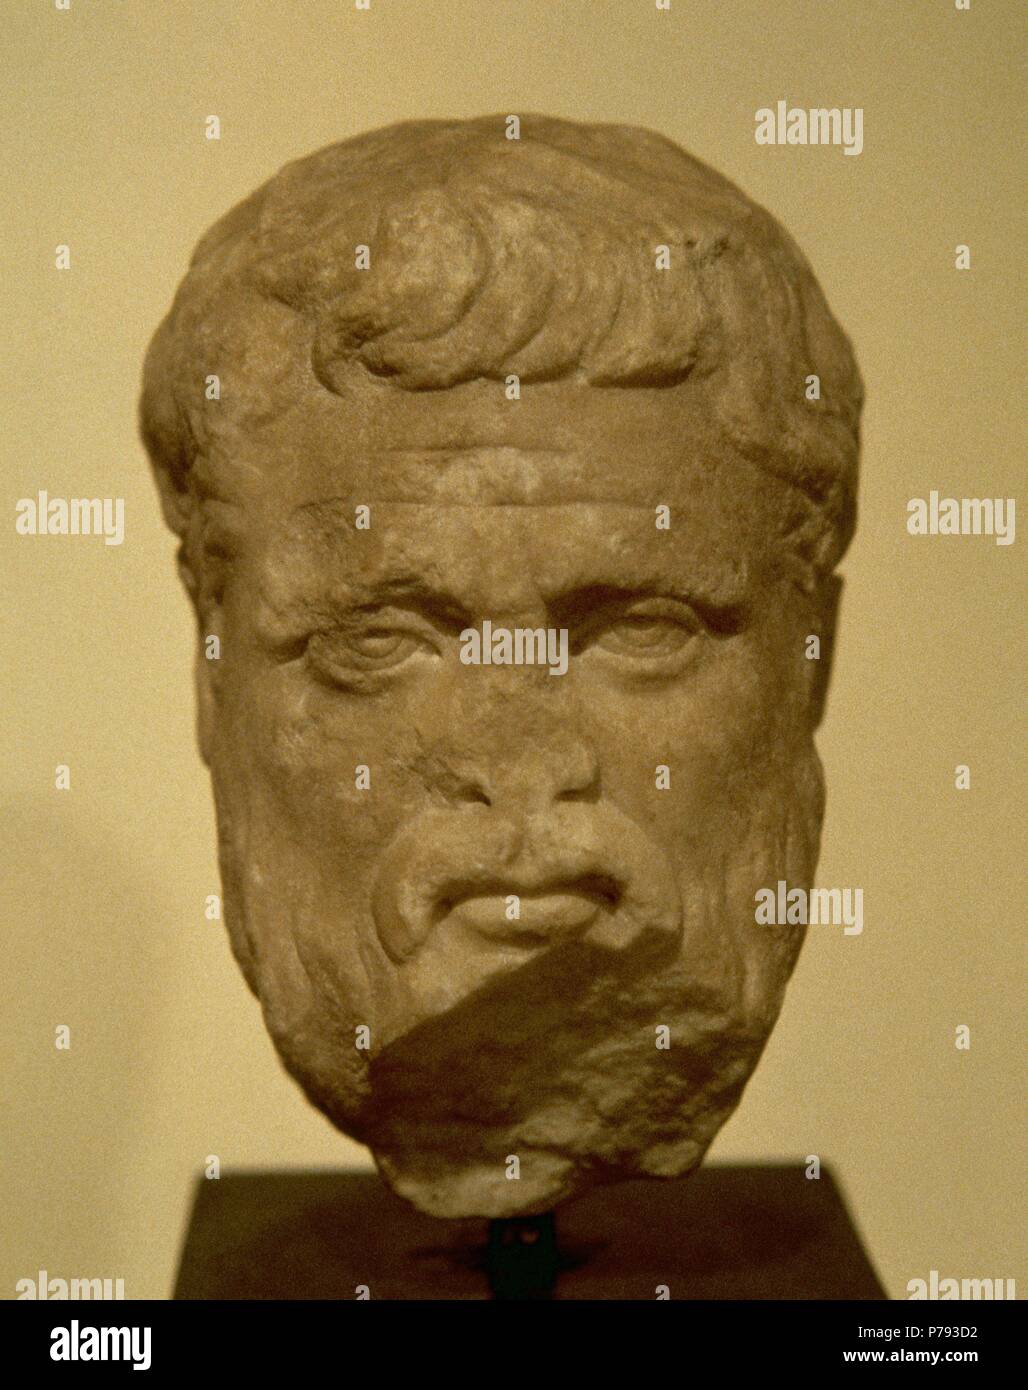 Plato (428/427-348/347 BC). Philosopher and mathematician in Classical Greece. Bust. 2nd-3rd C. AD. National Archaeological Museum. Athens. Greece. Stock Photo